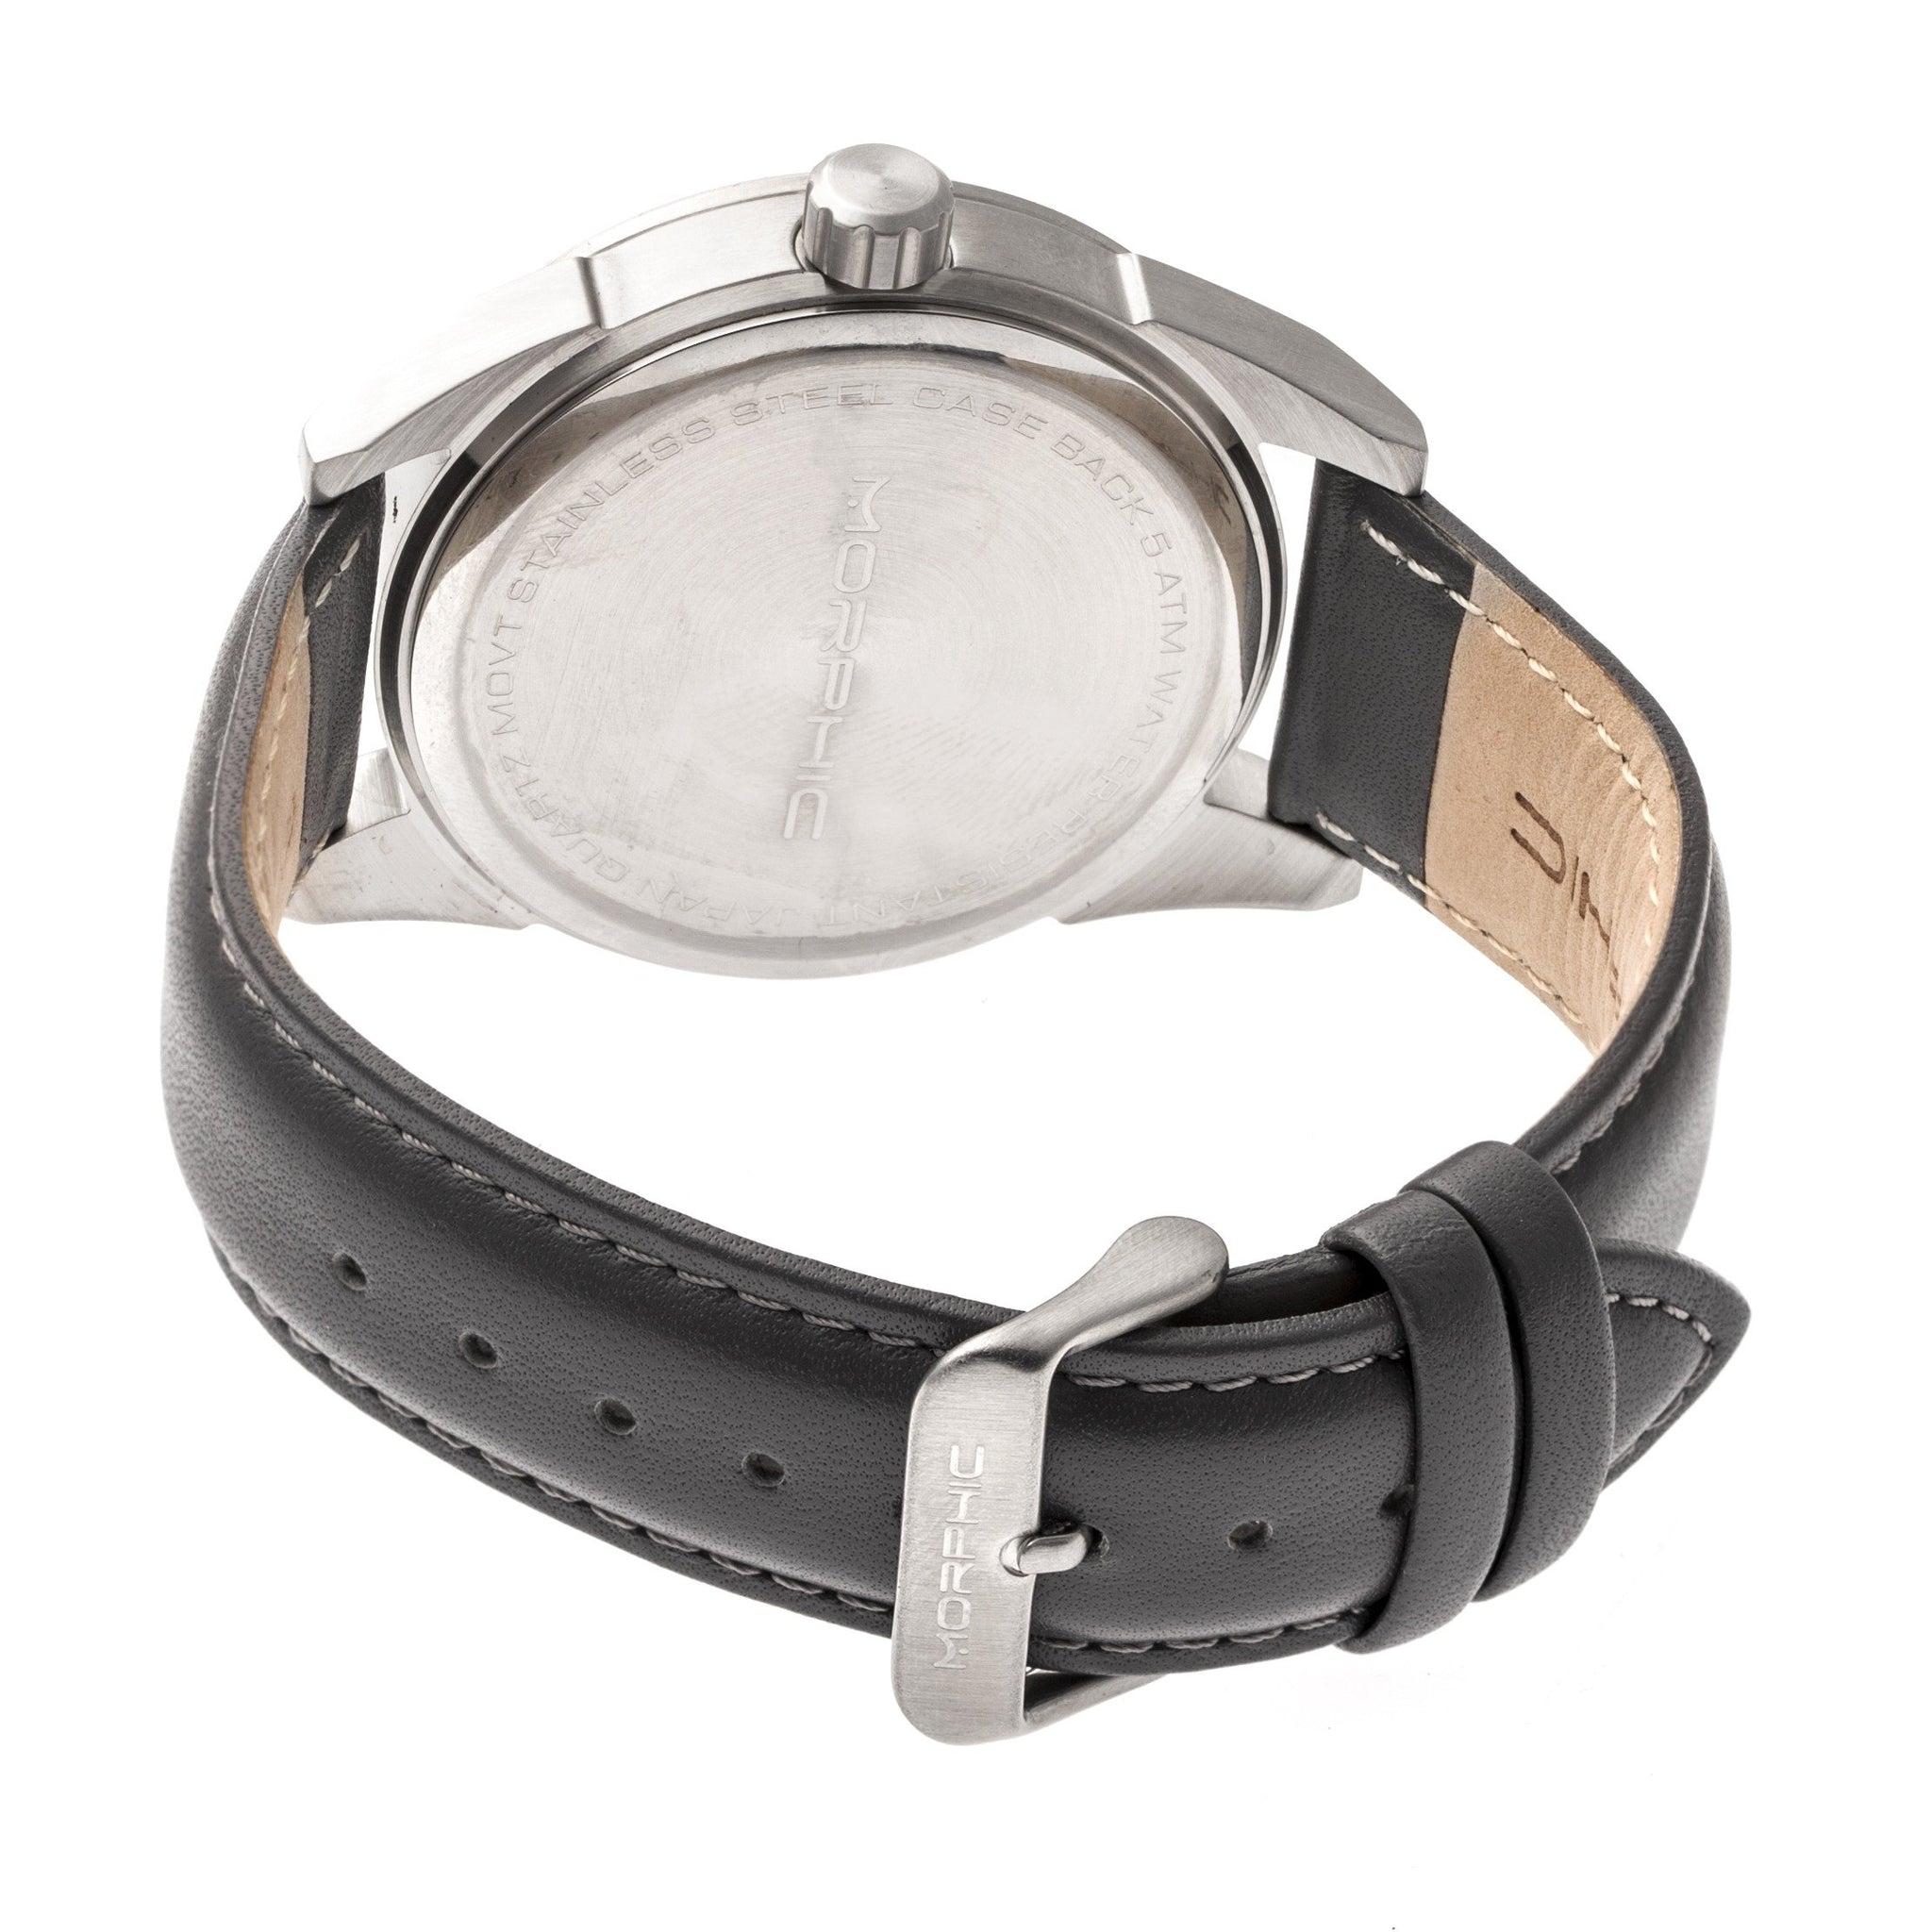 Morphic M63 Series Leather-Band Watch w/Date - Silver/Black - MPH6301